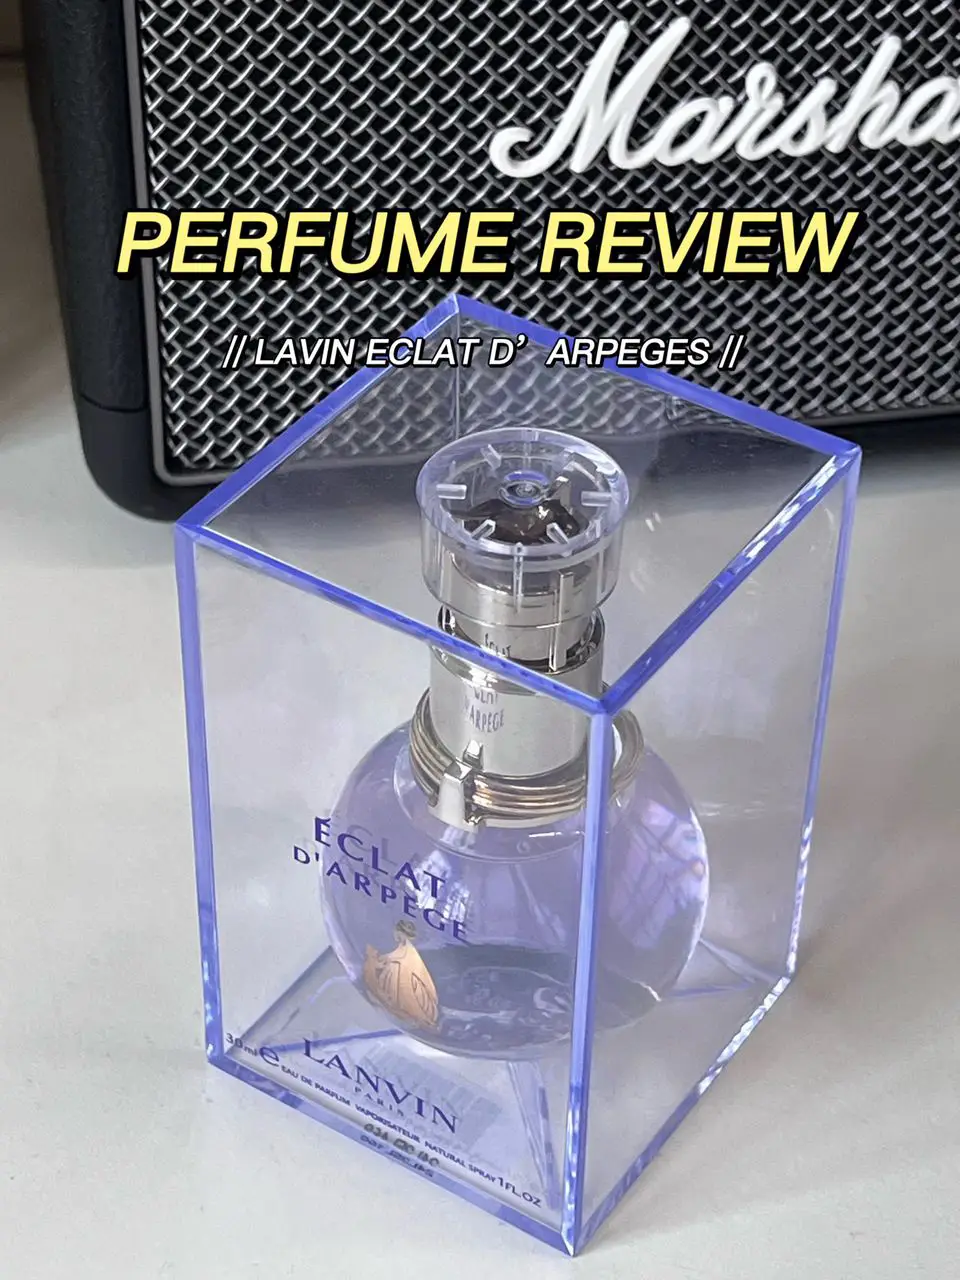 Lanvin Perfume for sale in the Philippines - Prices and Reviews in